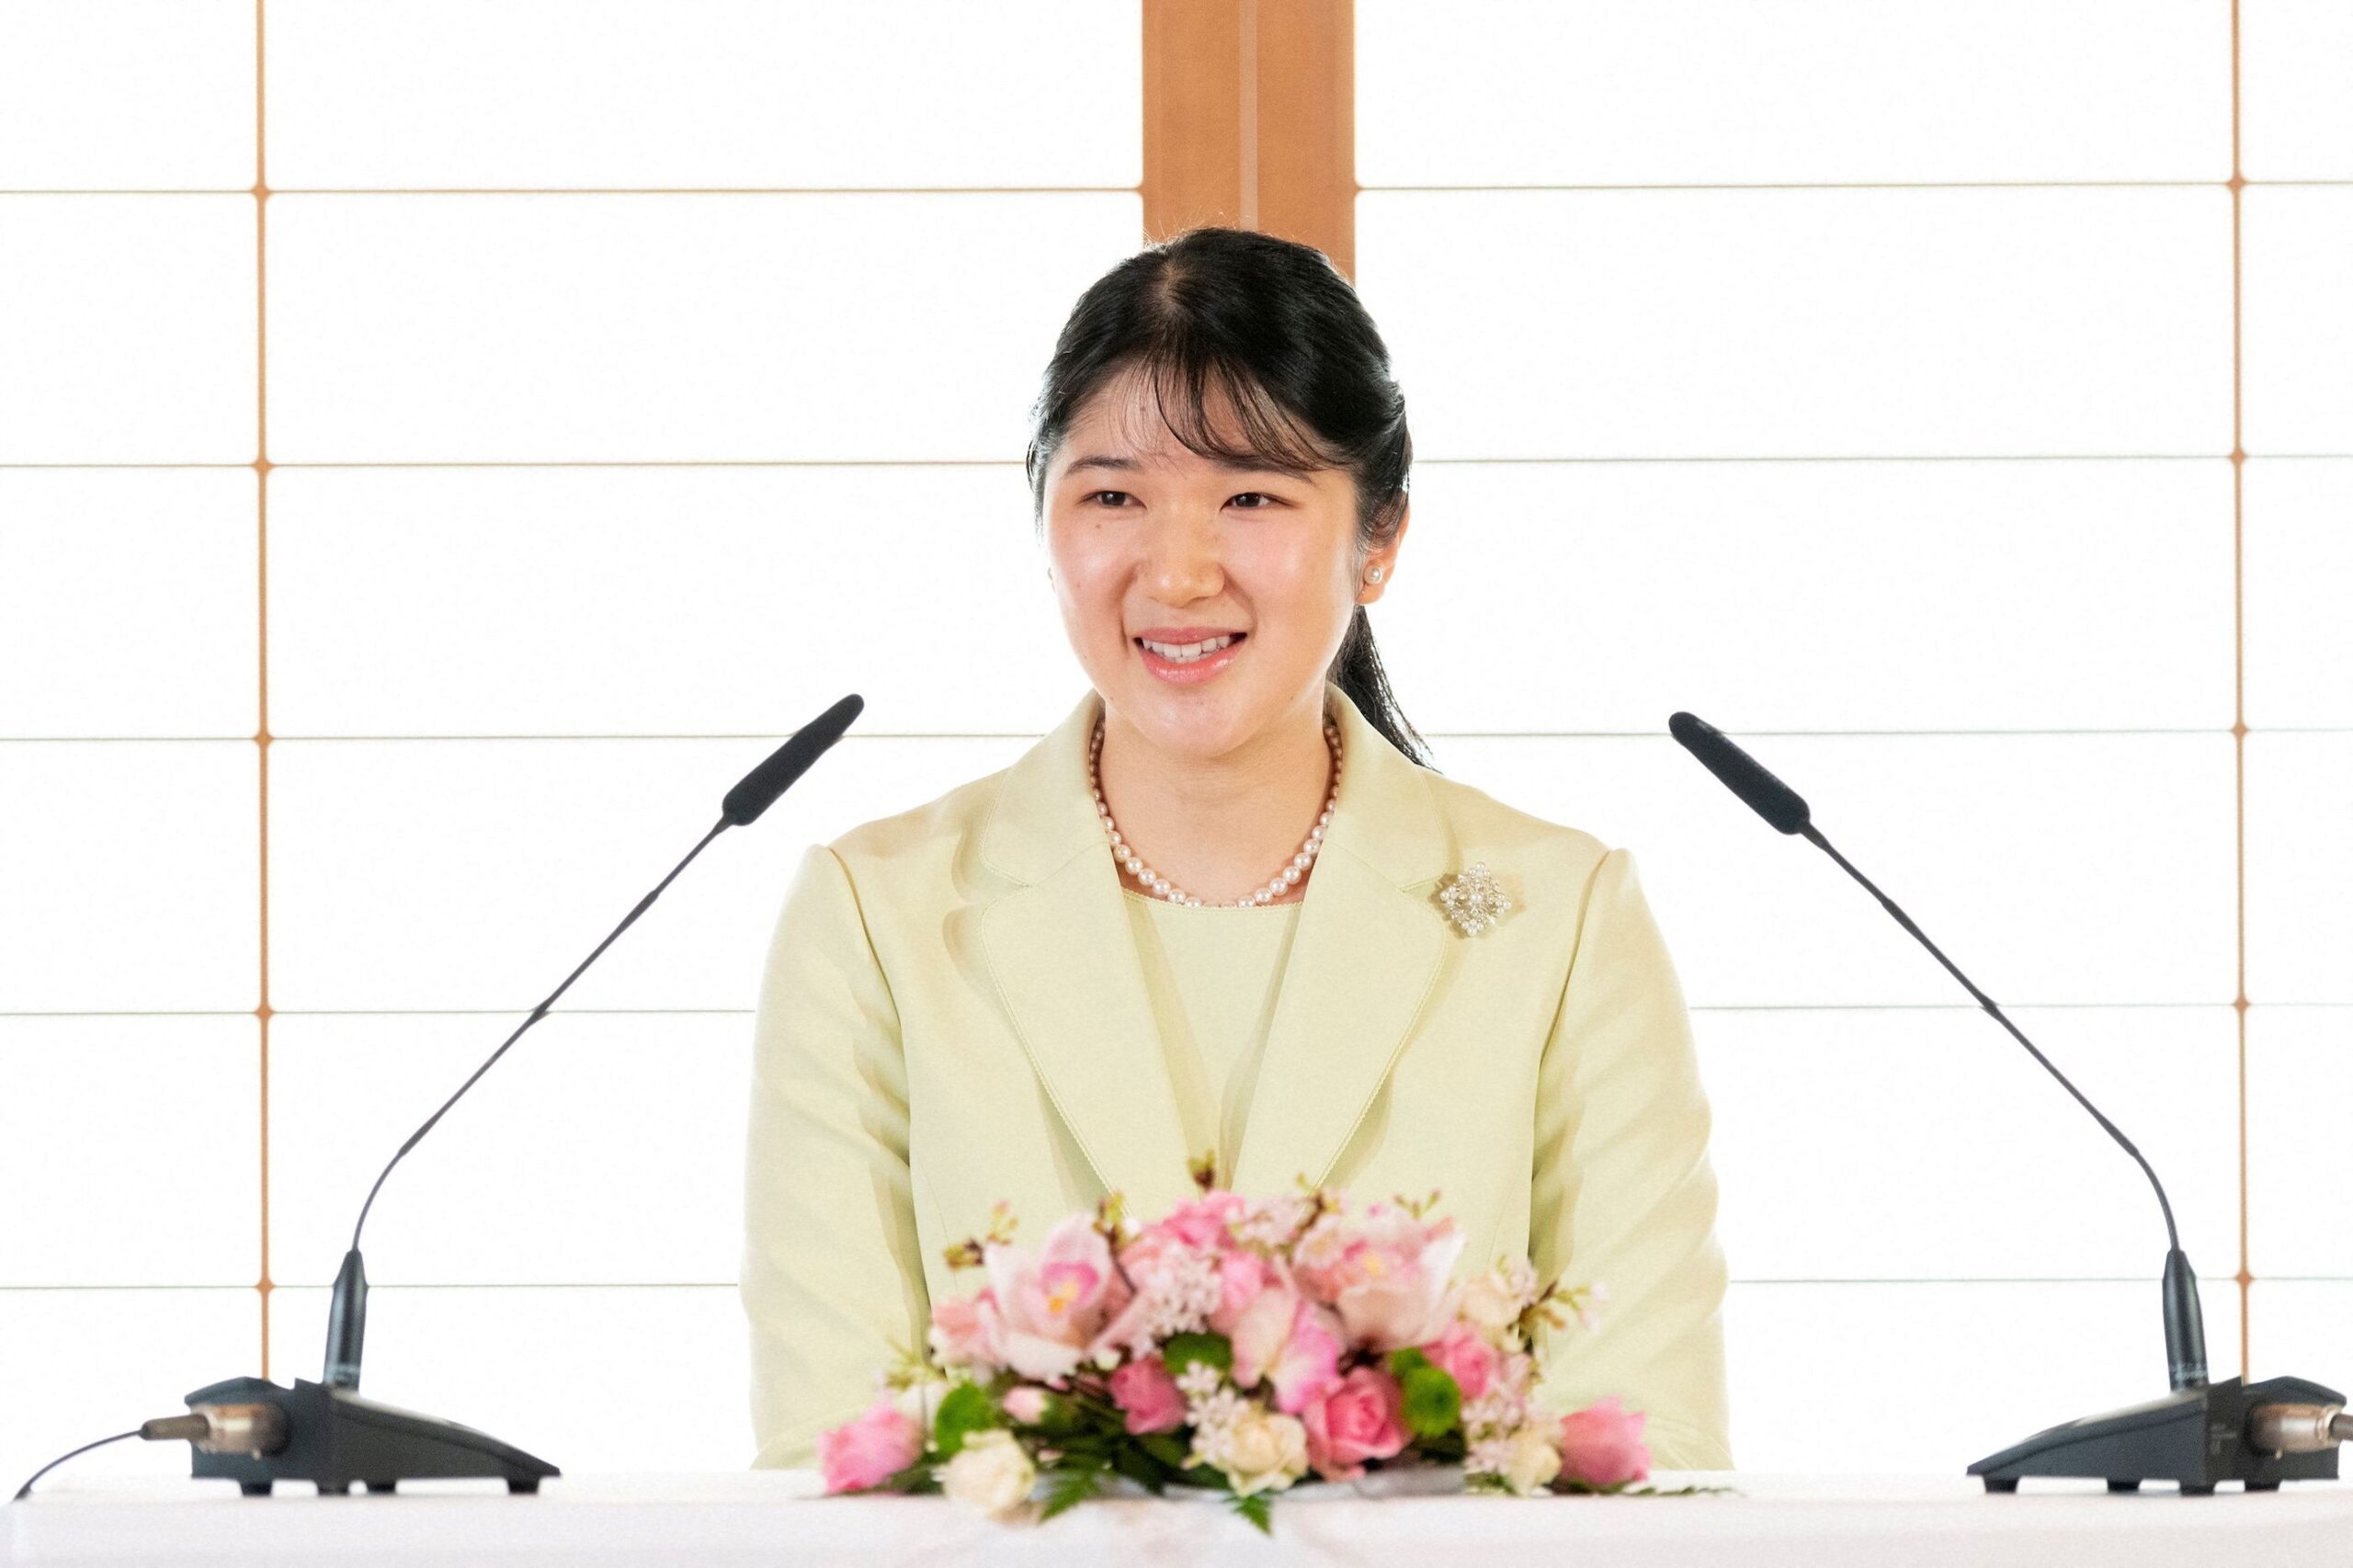 Japanese emperor’s daughter says being an adult royal still ‘rather tense,’ marriage far off